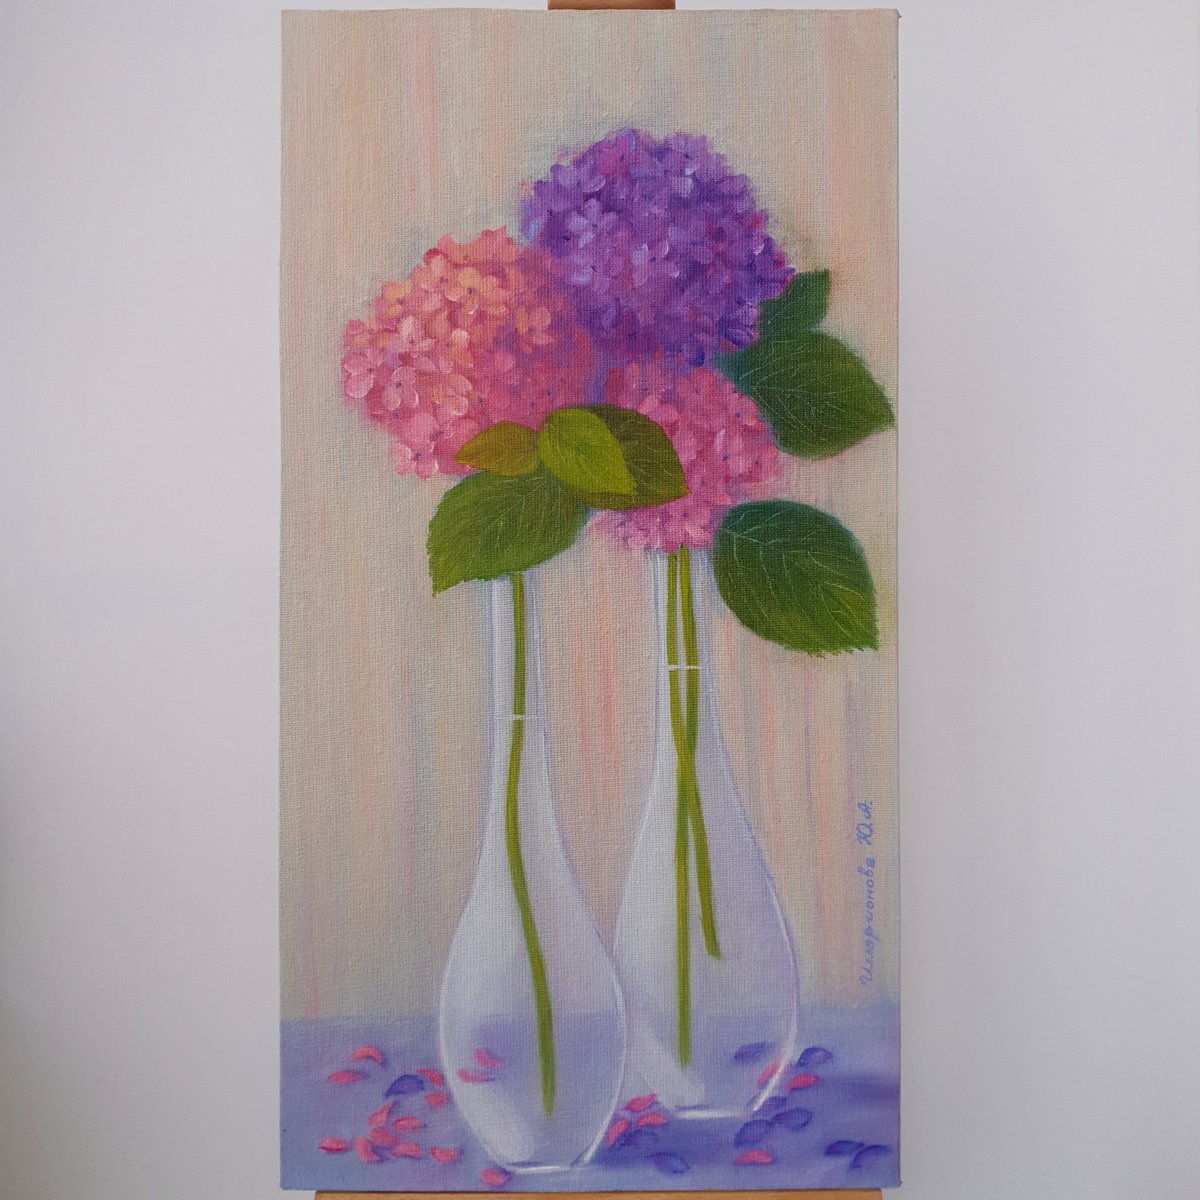 Excited to share the latest addition to my #etsy shop: Hydrangea painting original art, flowers in glass vase wall art, pink & purple hydrangea floral artwork. 24' by 13' (60x32cm.) etsy.me/3esfpHc 
#hydrangeapainting
#originalart
#hydrangeawallart
#flowers